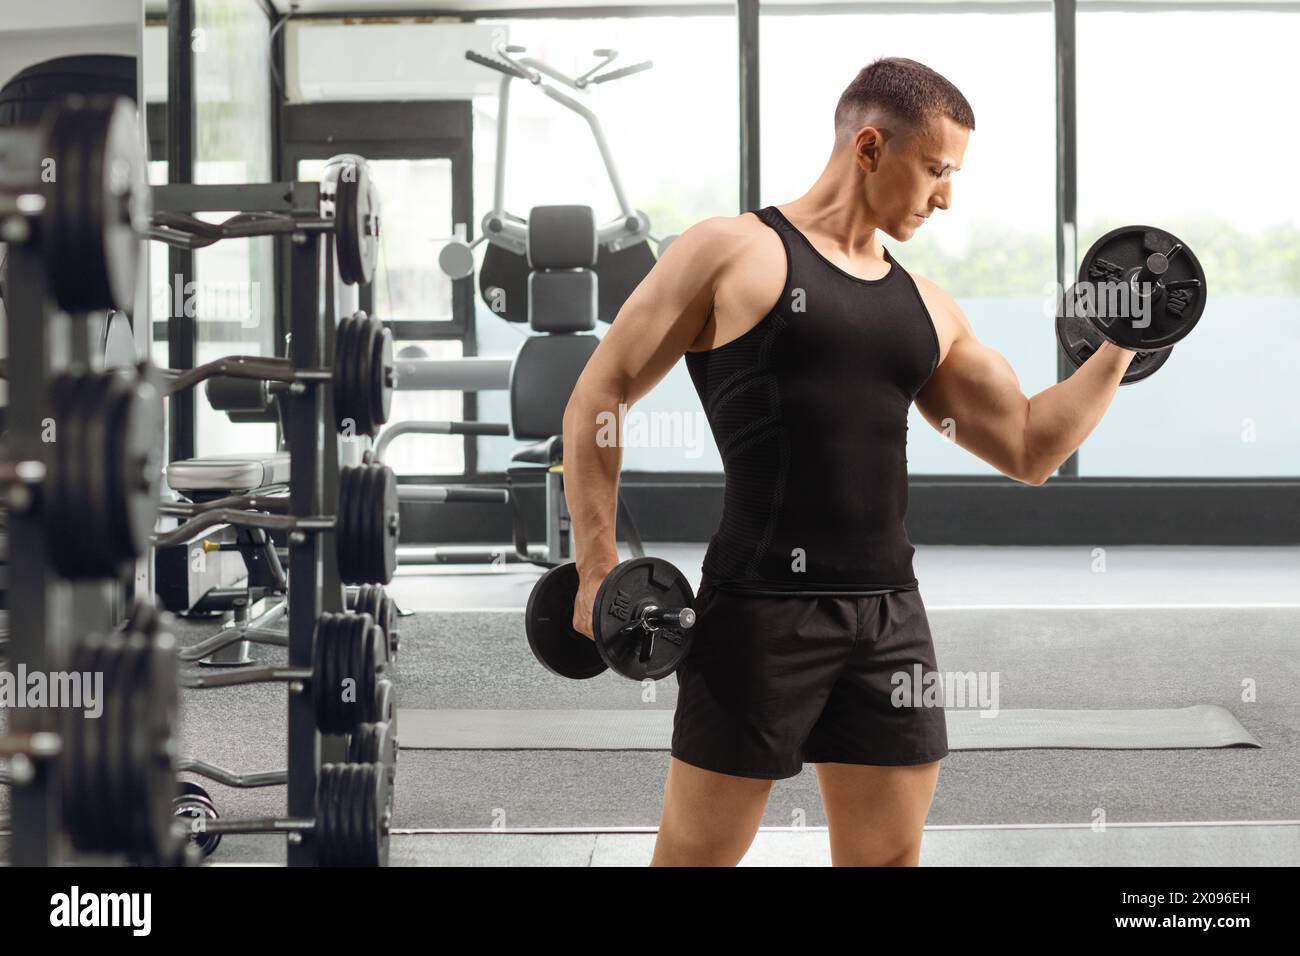 Man exercising weight training at a gym, sport and fitness concept Stock Photo